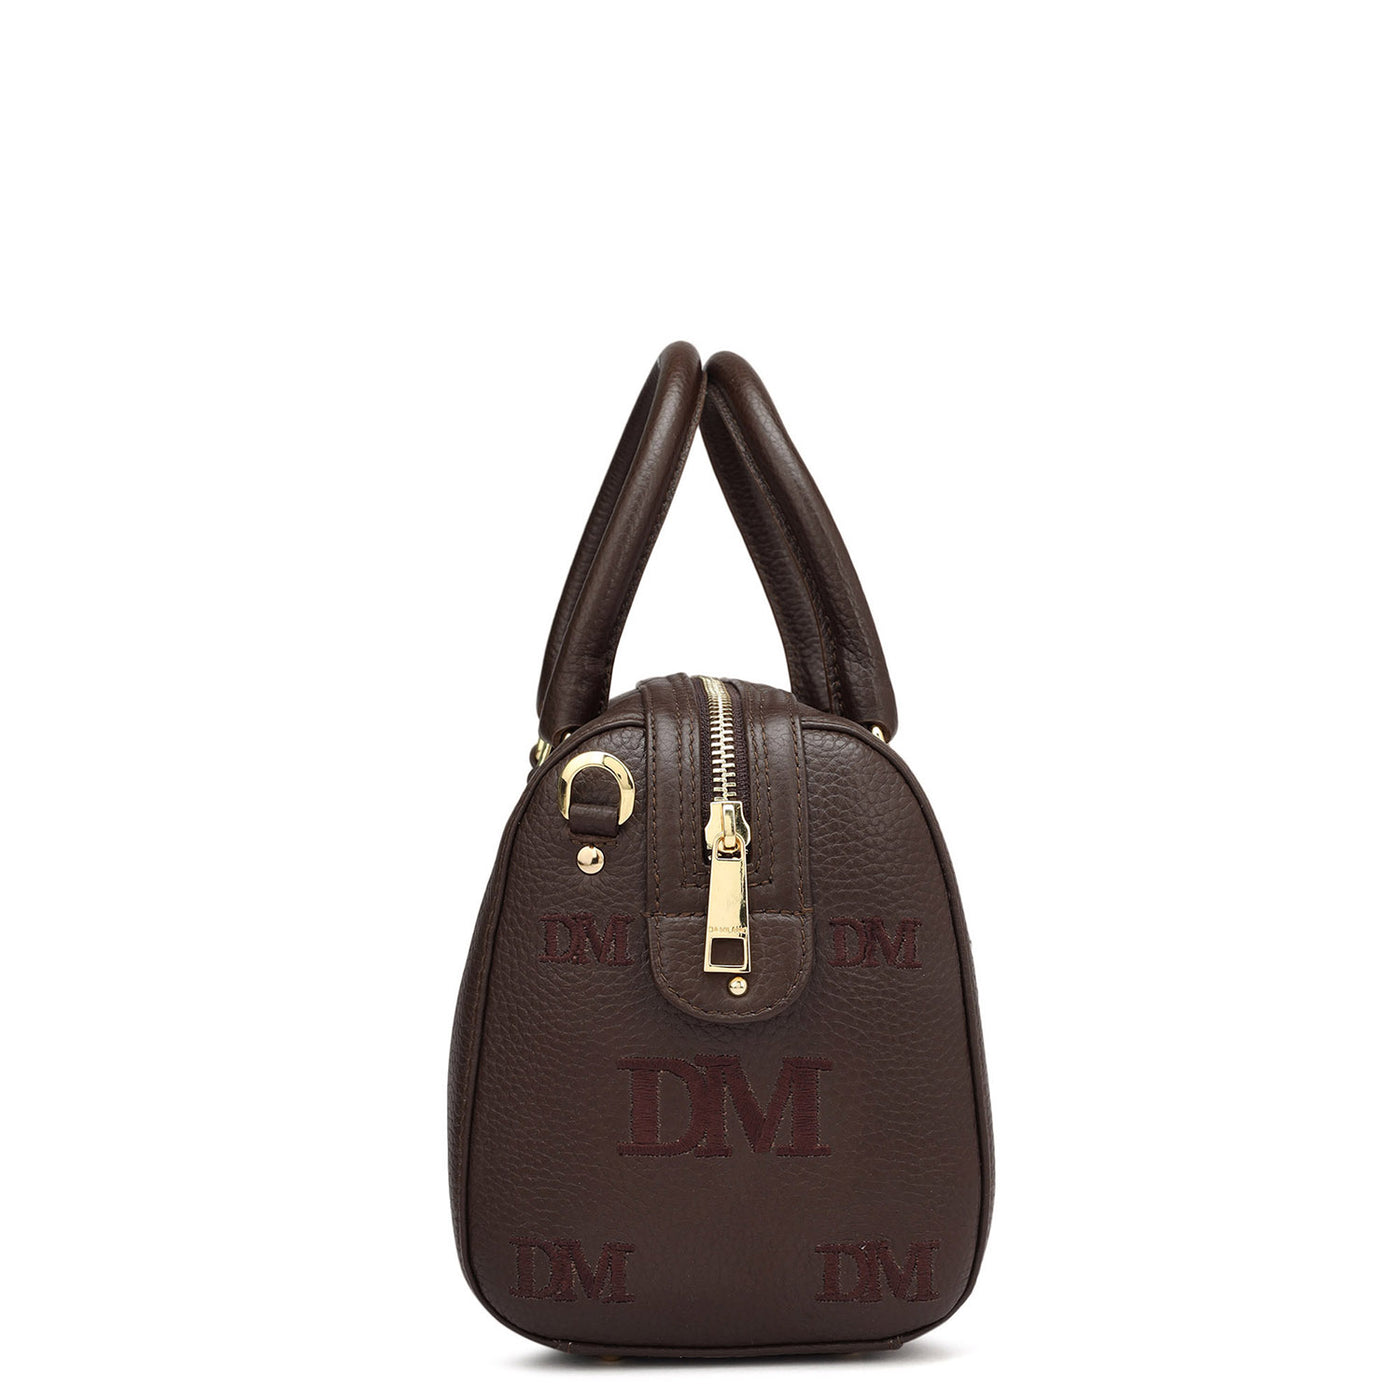 Small Wax Leather Satchel - Chocolate